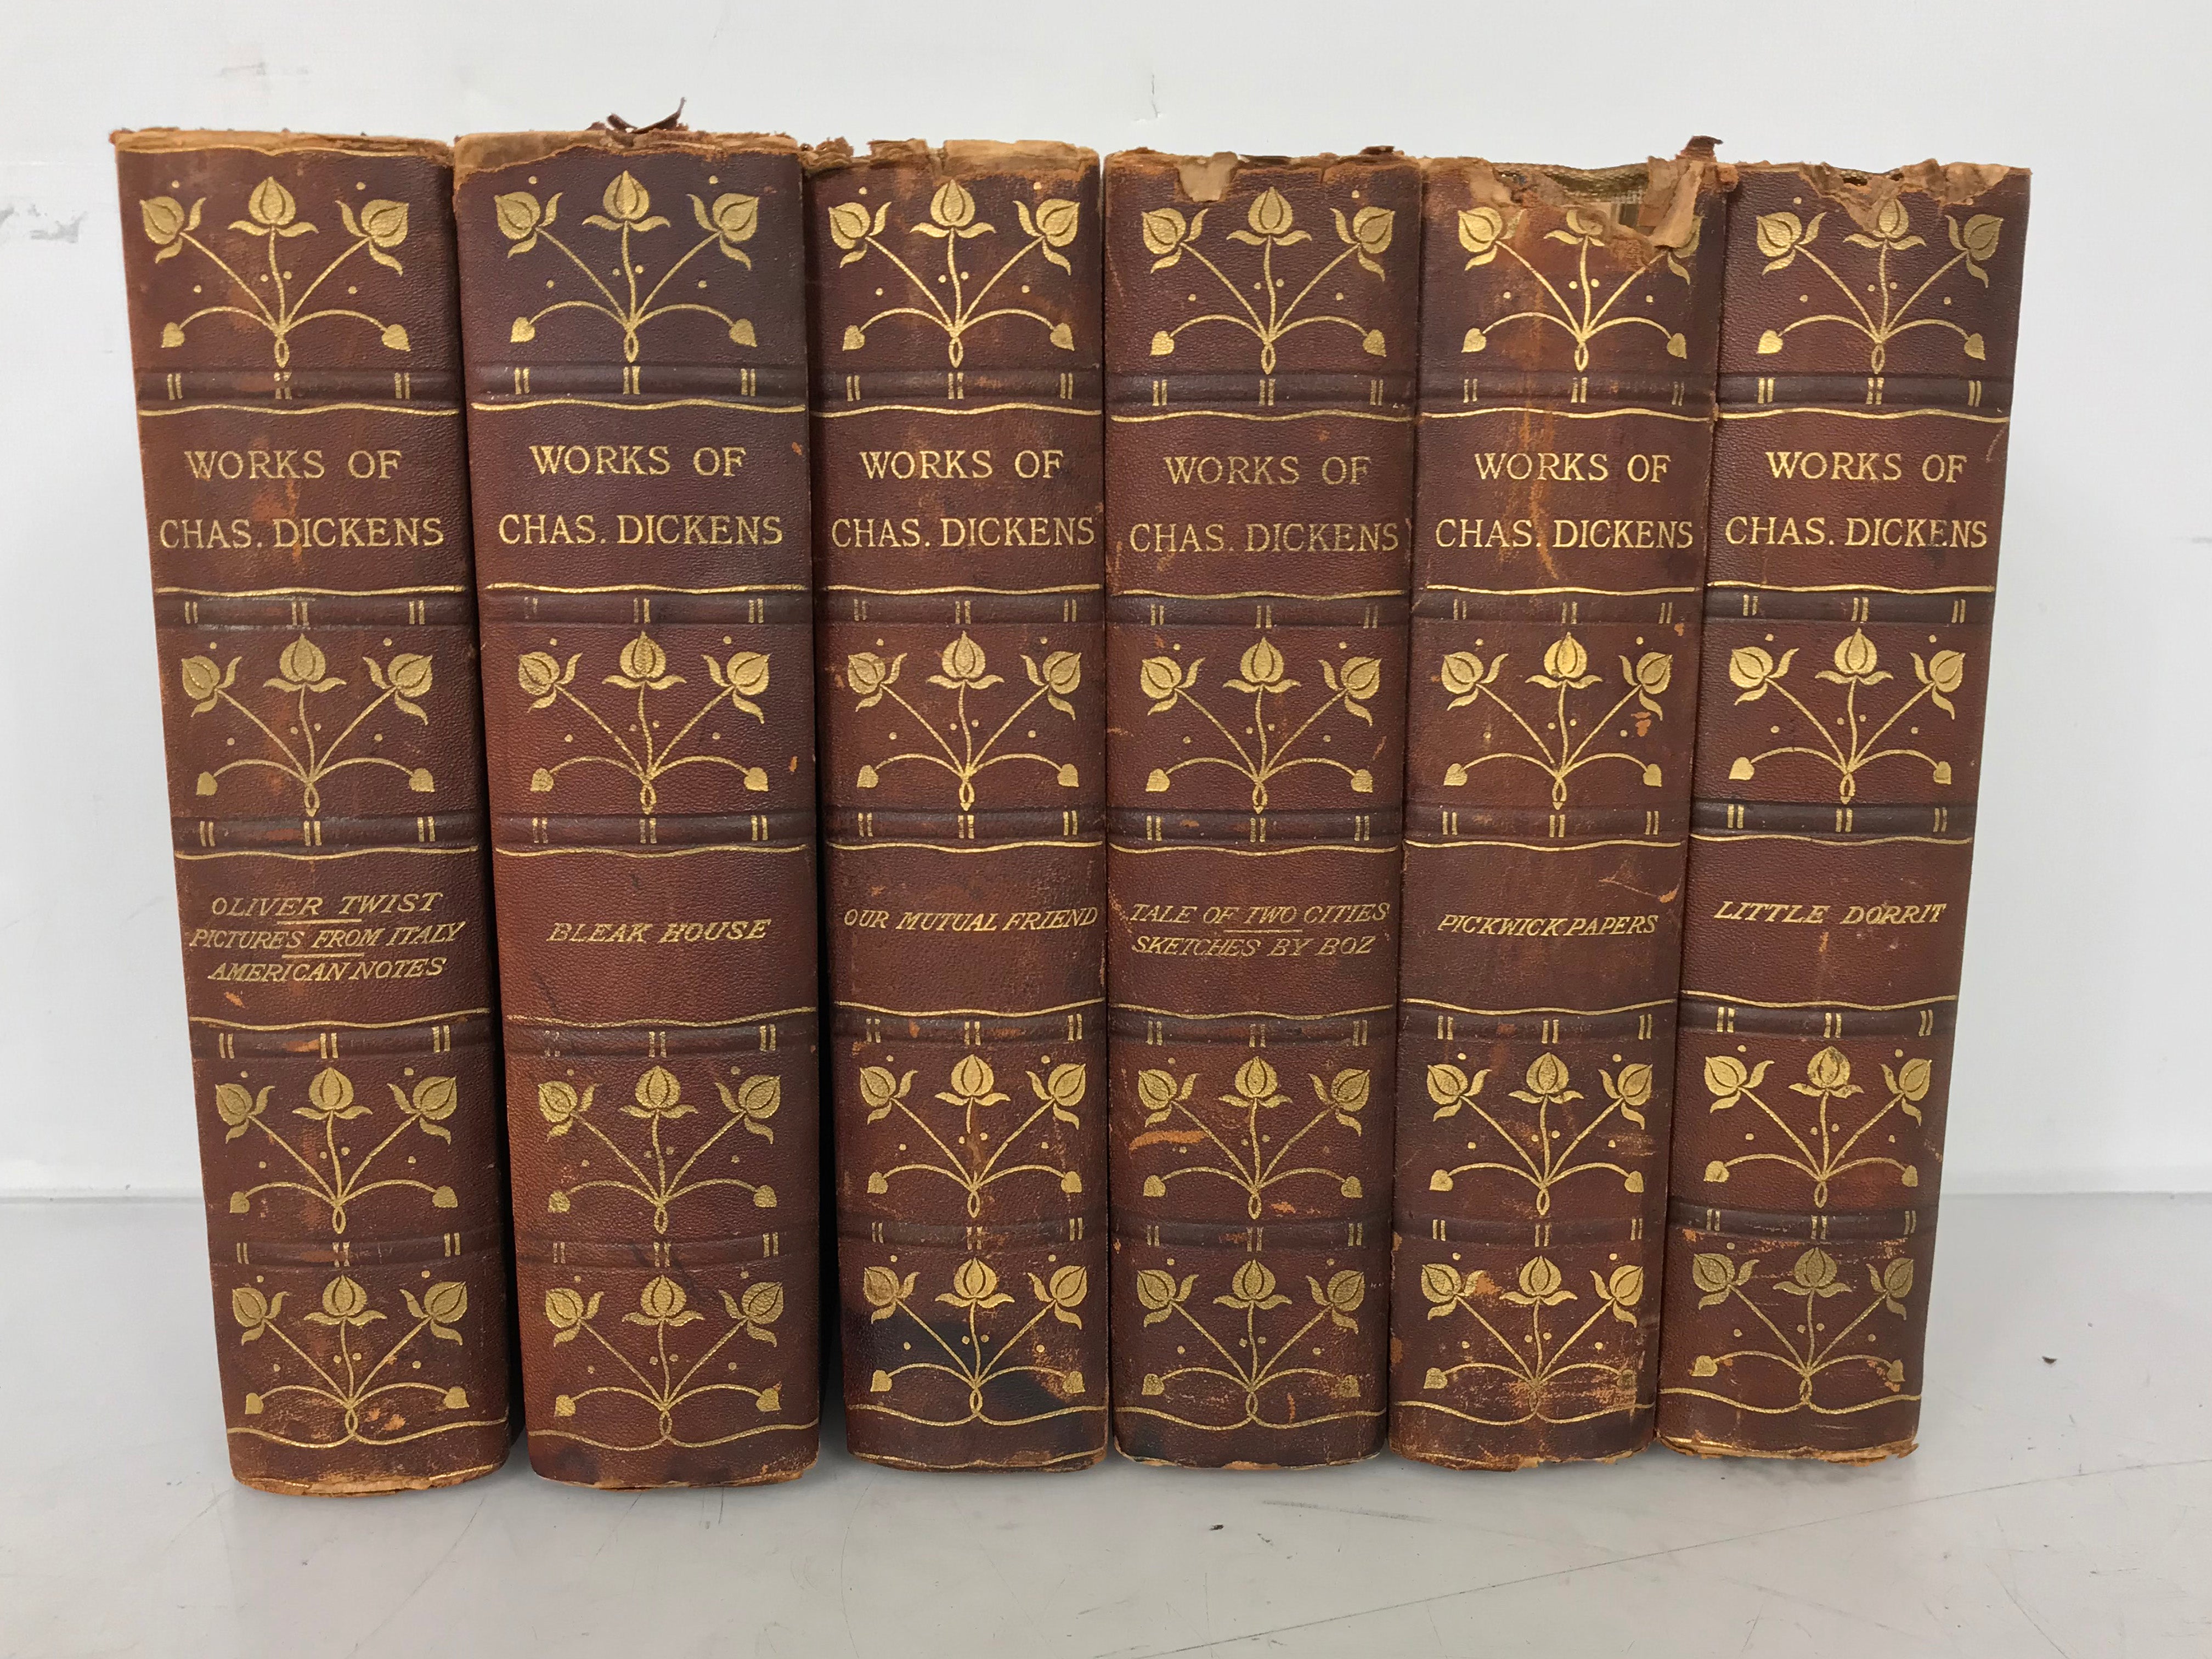 The Complete Works of Charles Dickens 6 Vols Kelmscott Society